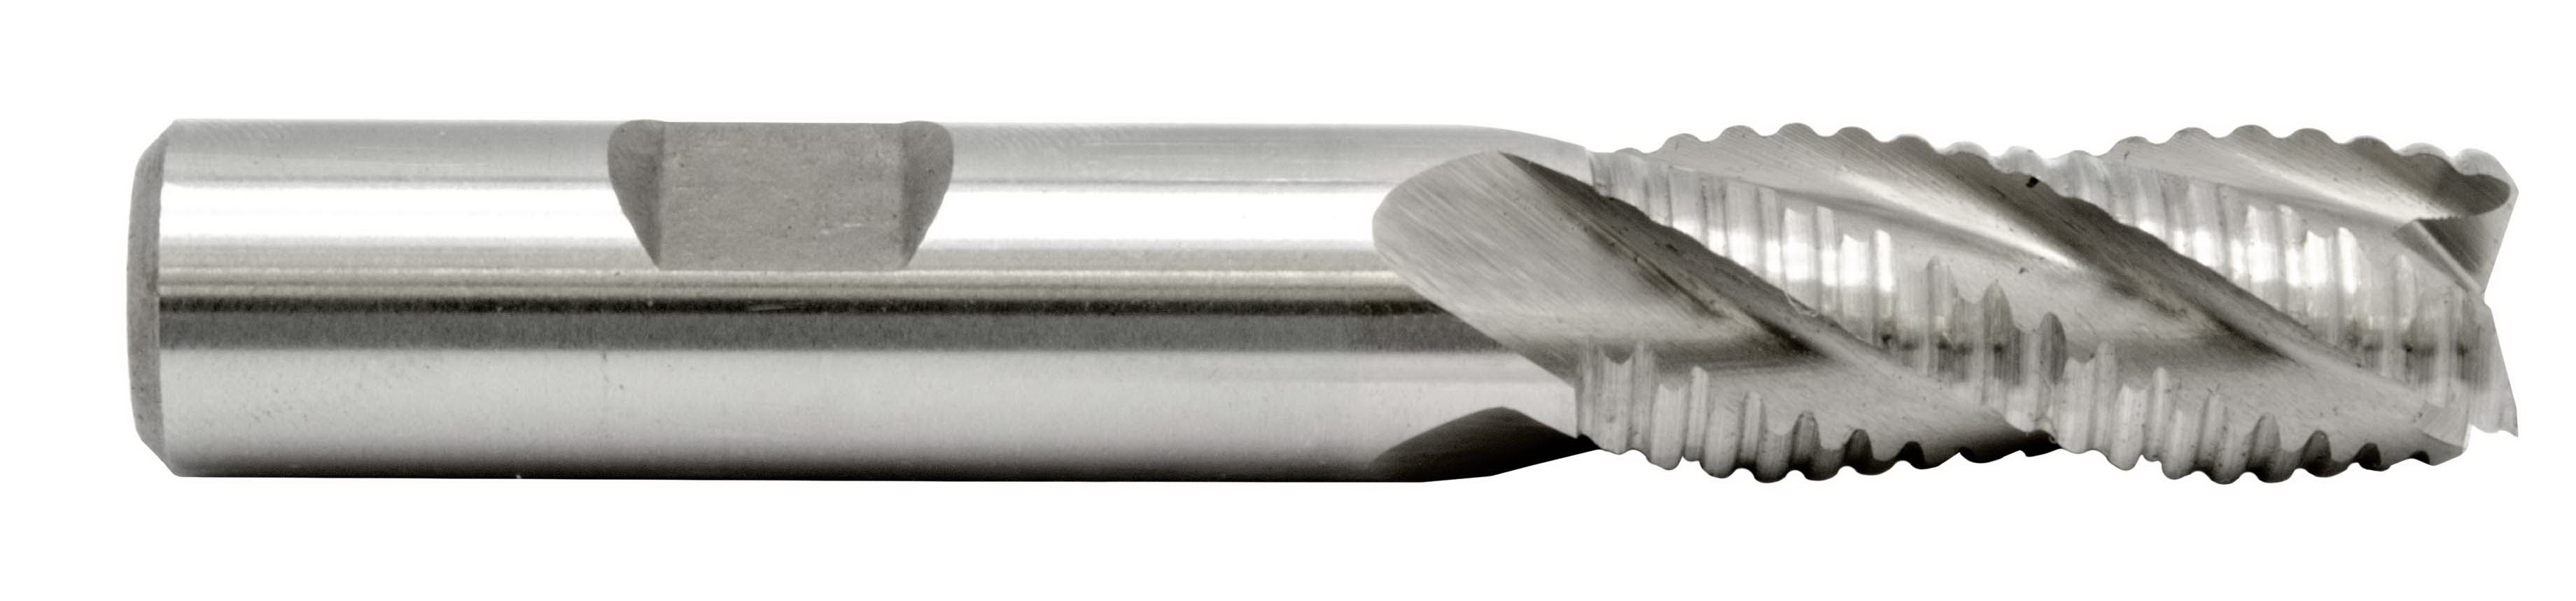 1/8 Miniature Double End End Mill 4 Flute HSS Michigan Drill Series 246S